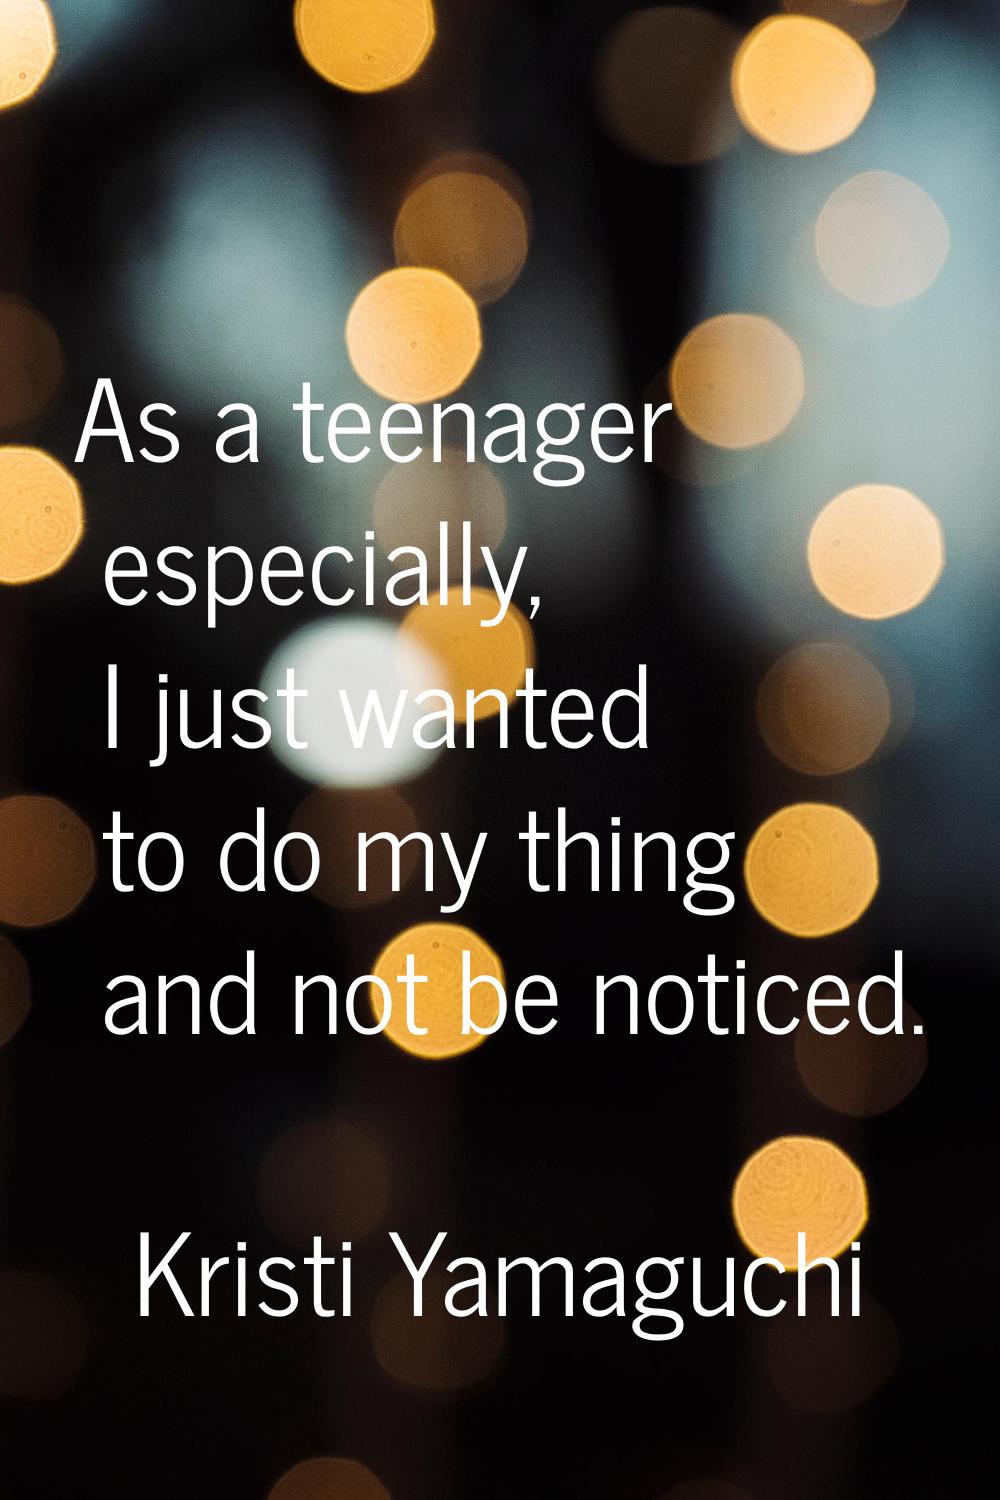 As a teenager especially, I just wanted to do my thing and not be noticed.